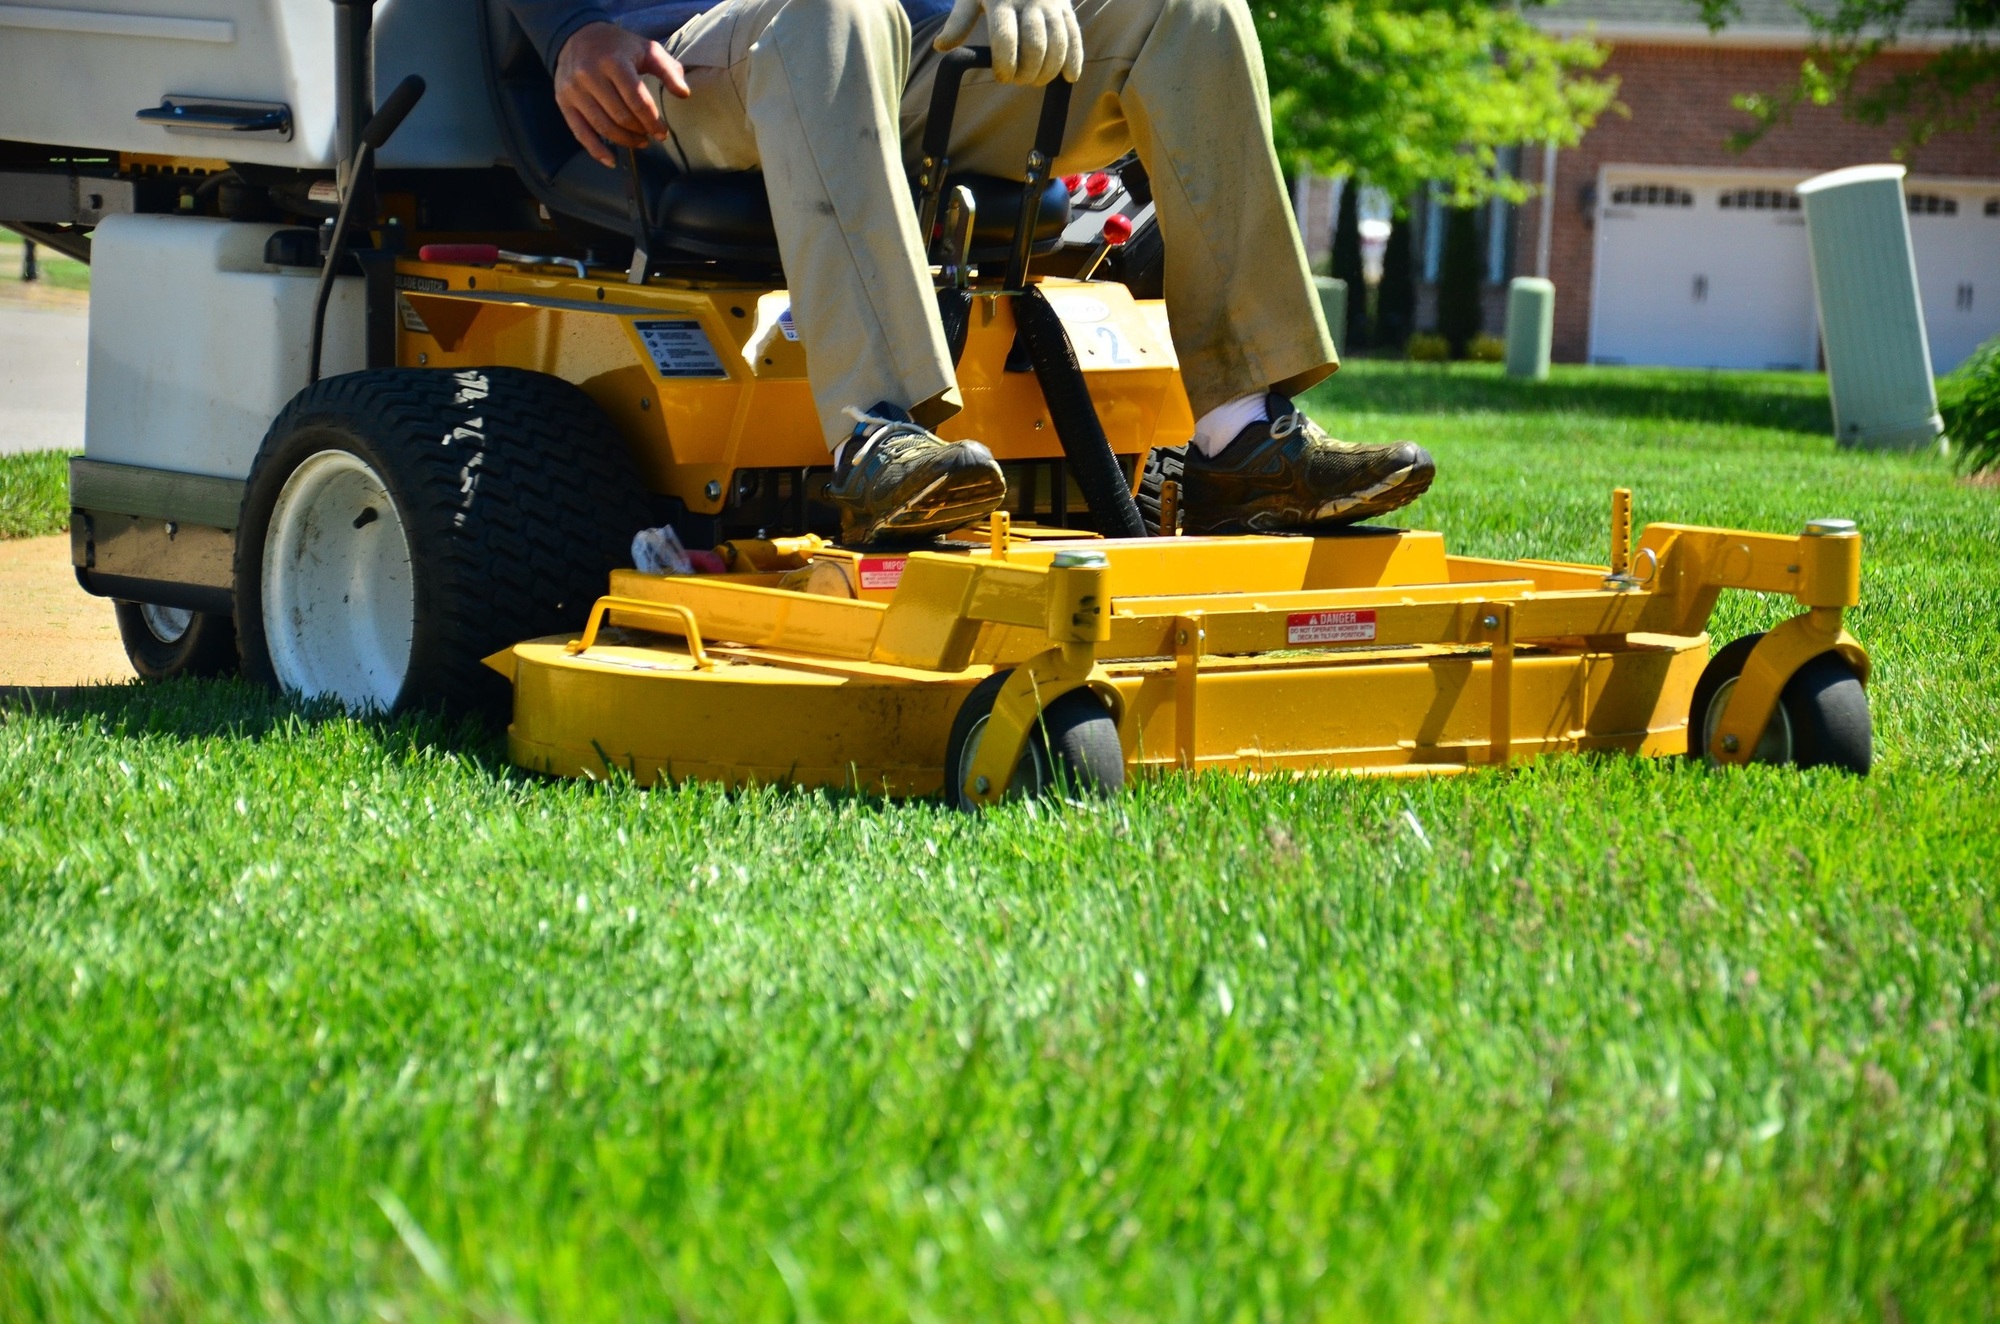 Lawn care company near me: Do you want to know how to choose the right lawn care company? Read on to learn how to make the right choice.